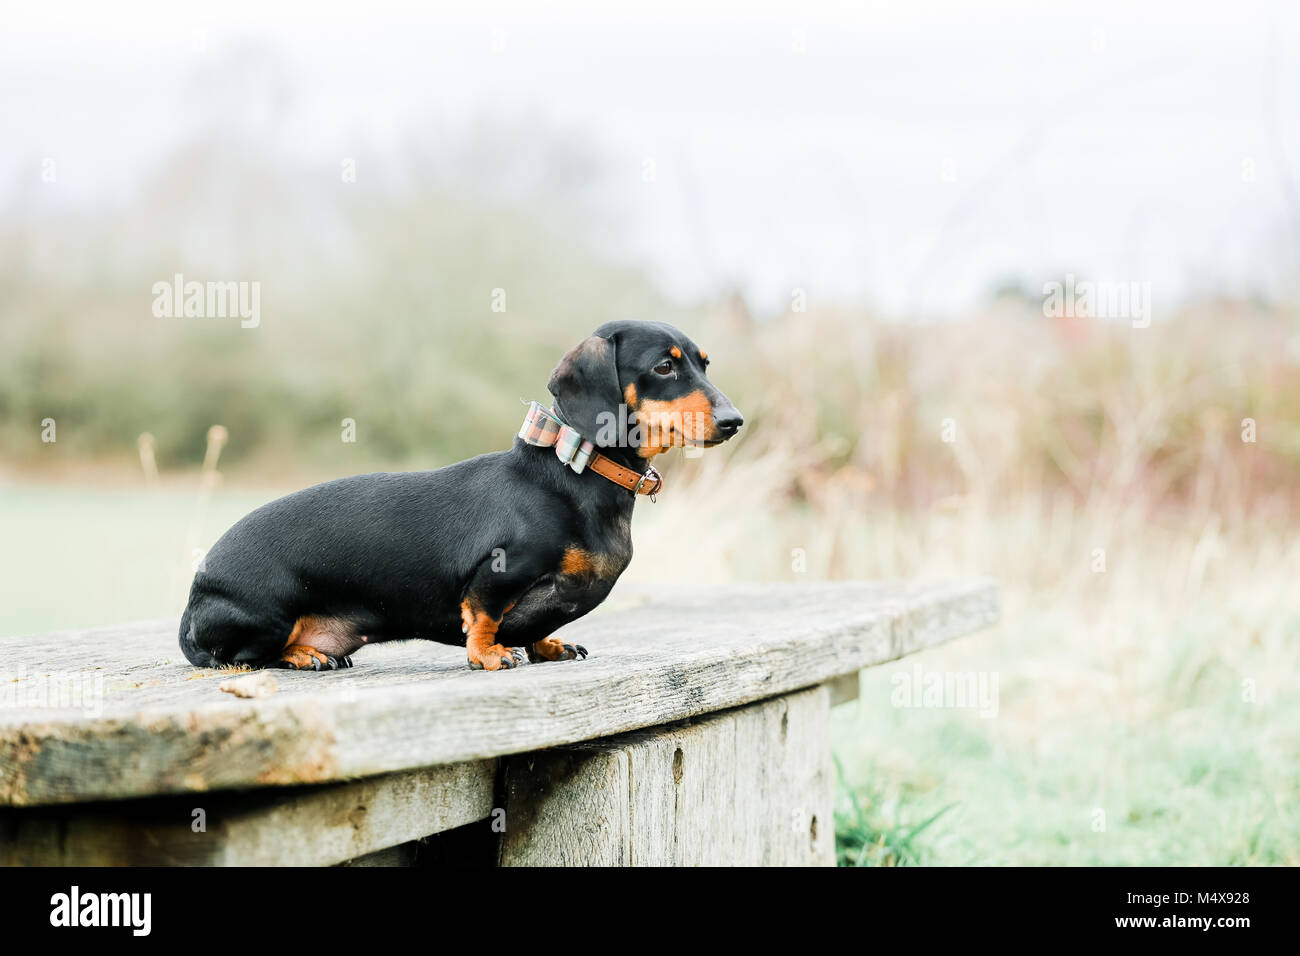 Miniature Dachshund on a dog walk in the countryside, Oxfordshire, UK Stock Photo